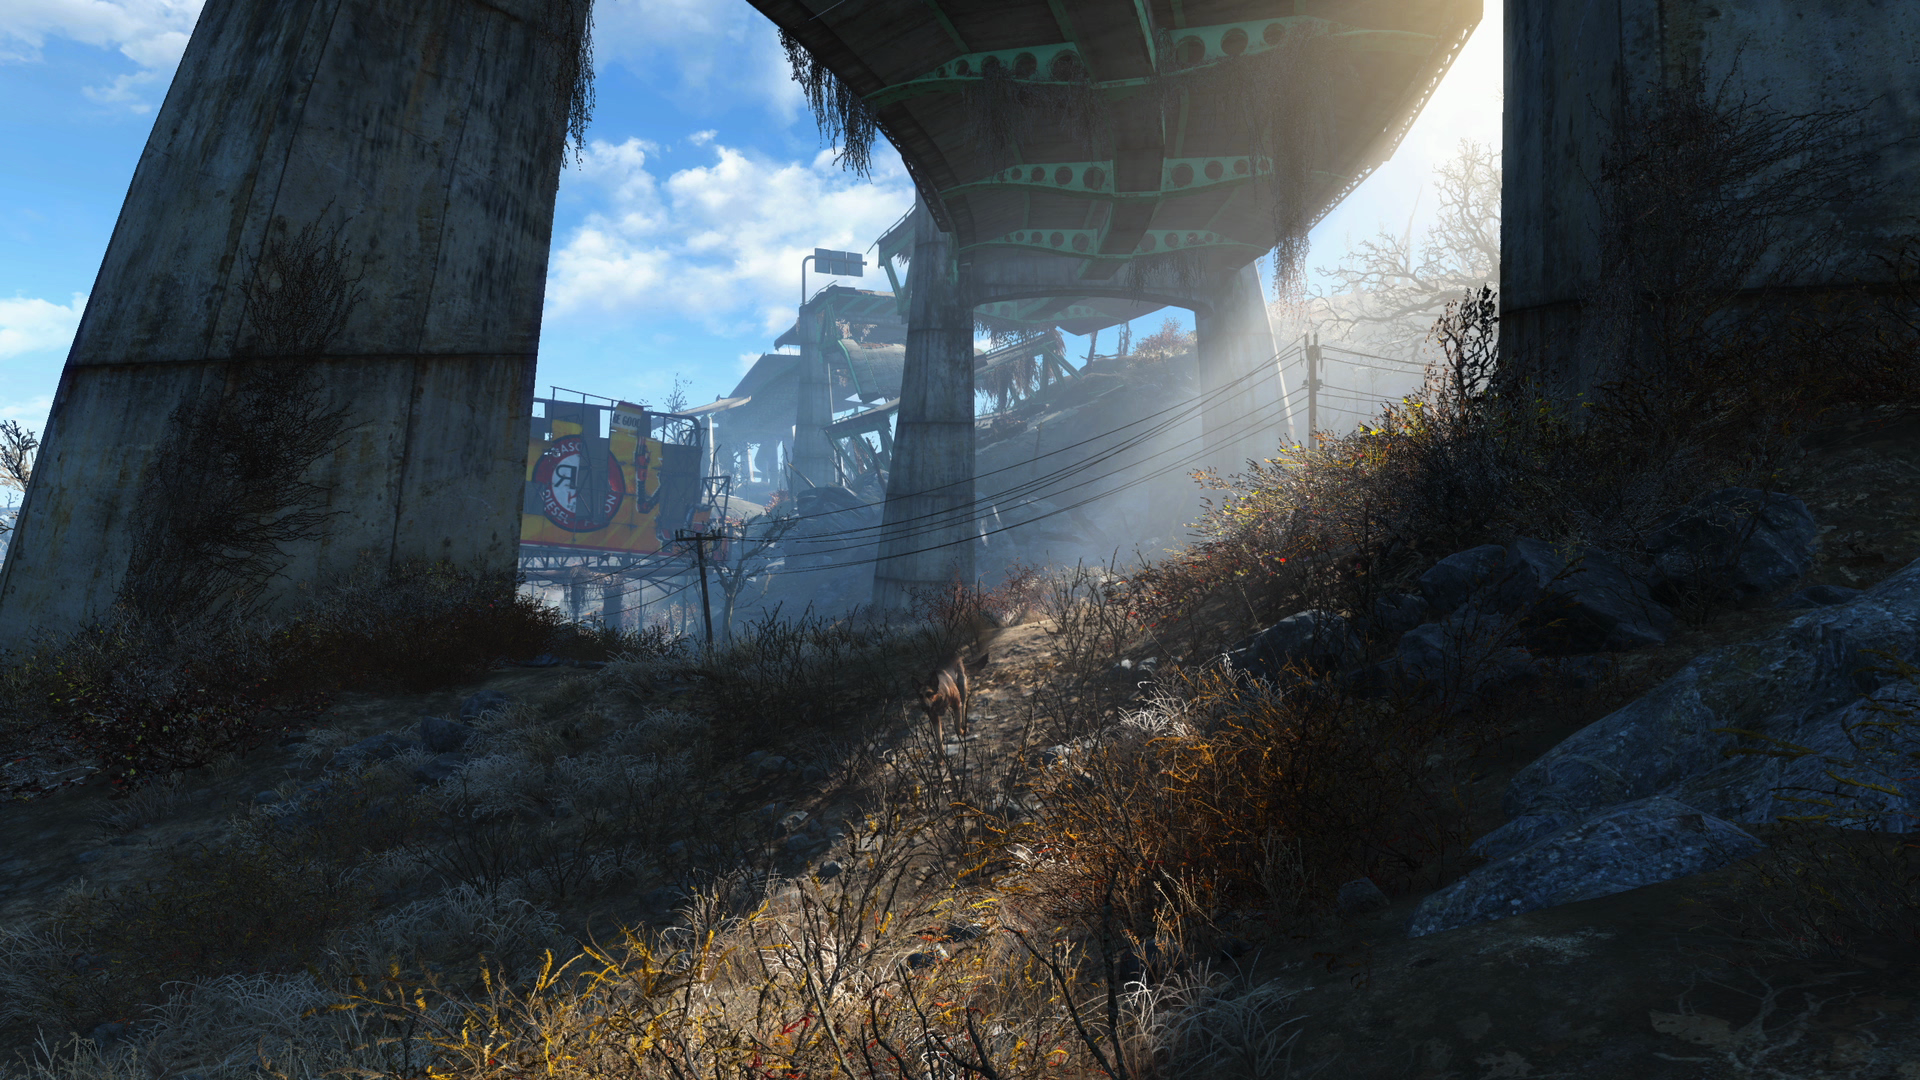 Media asset in full size related to 3dfxzone.it news item entitled as follows: Primi trailer e screenshot ufficiali in Full HD del game Fallout 4 di Bethesda | Image Name: news22682_Bethesda-Fallout-4-screenshot_6.png